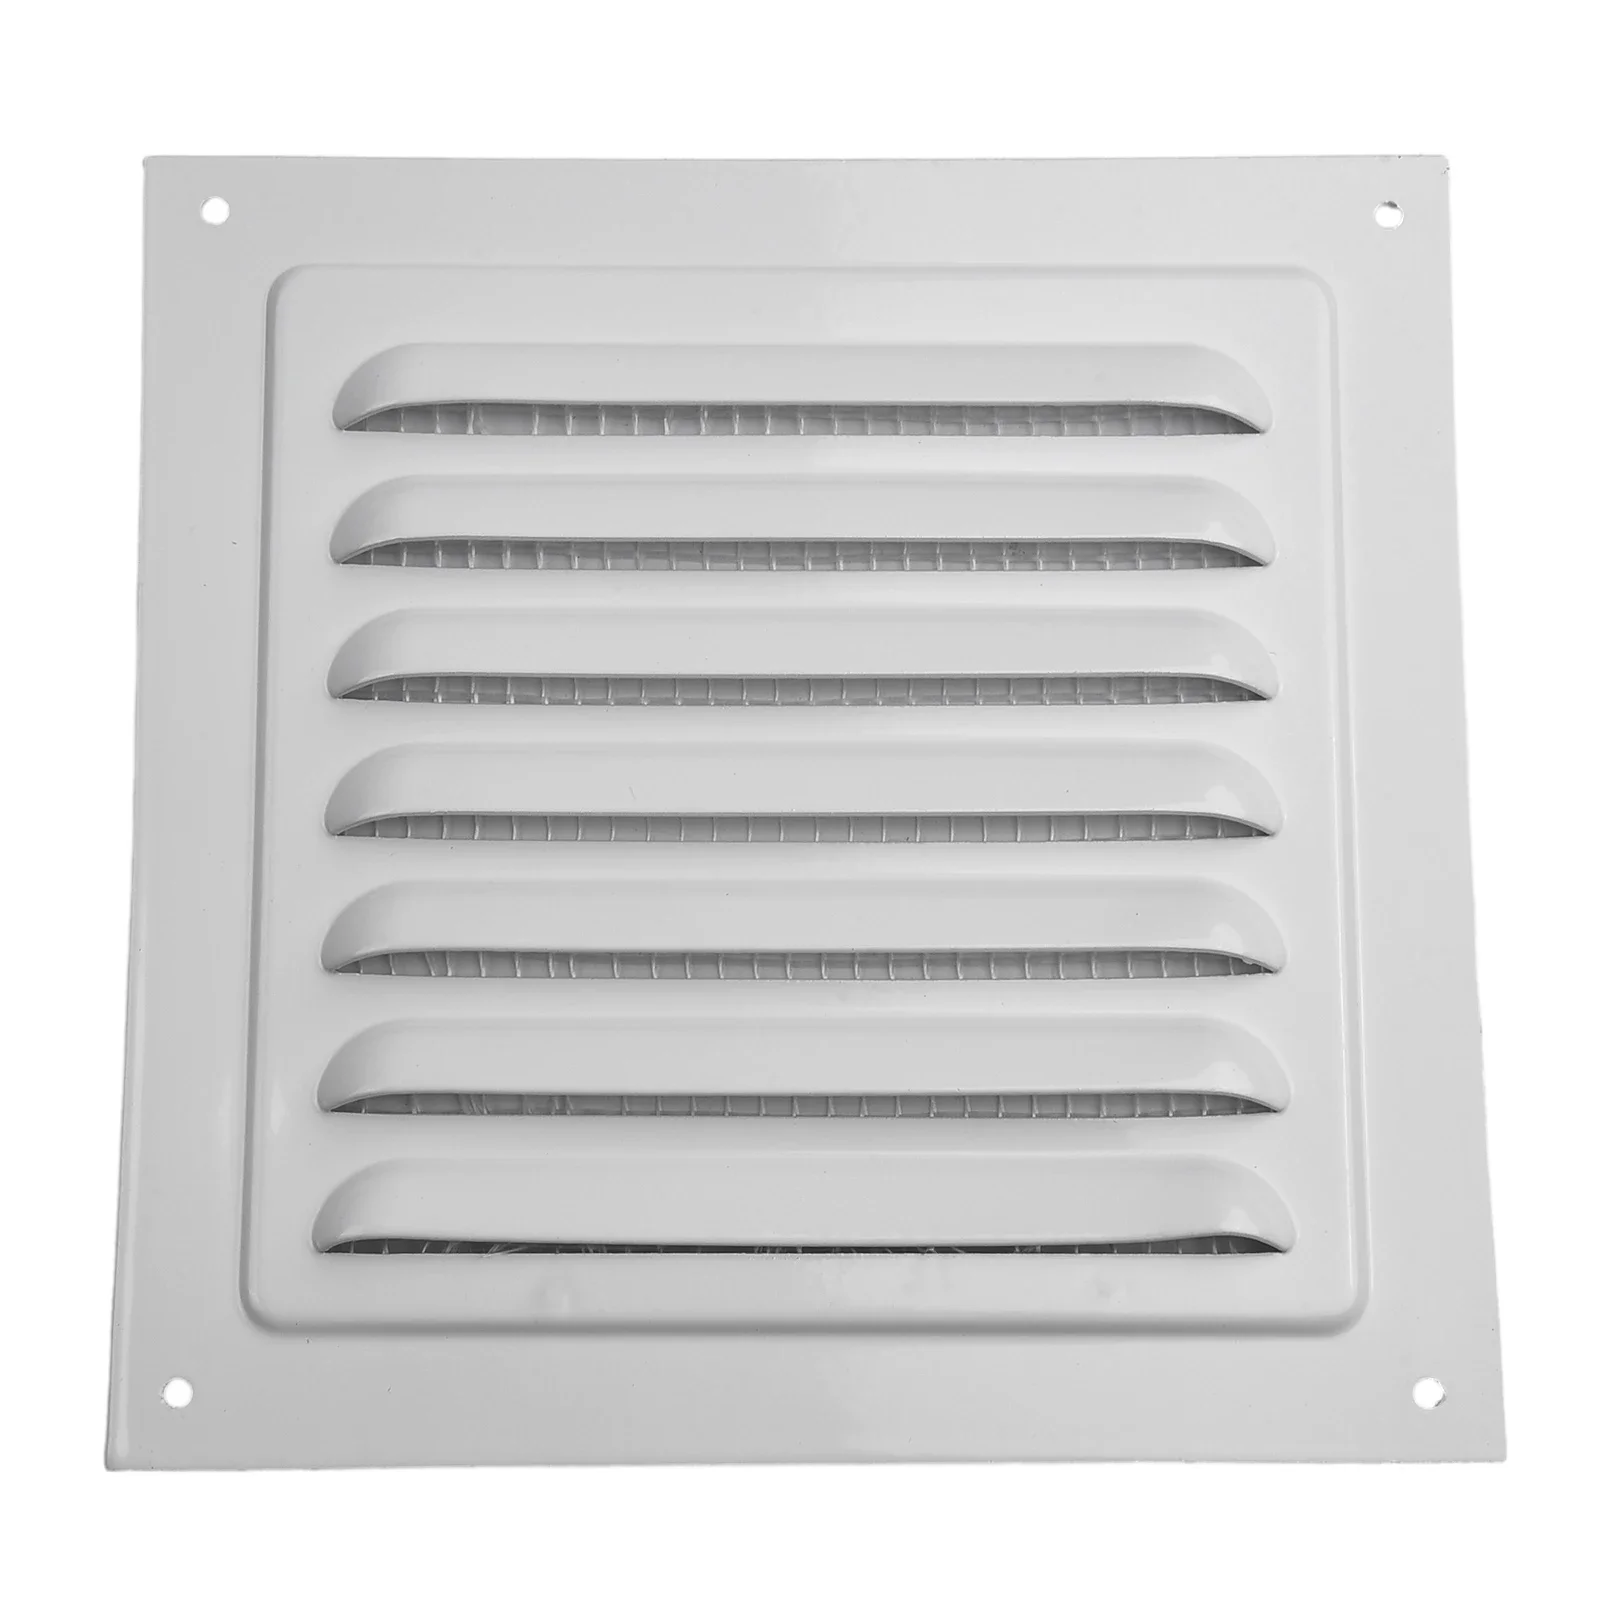 

Air Vent Grille Ventilation Cover Metal Square Vent Insect Screen Cover Aluminum Vents Plate Louver Air Outlet Fresh System